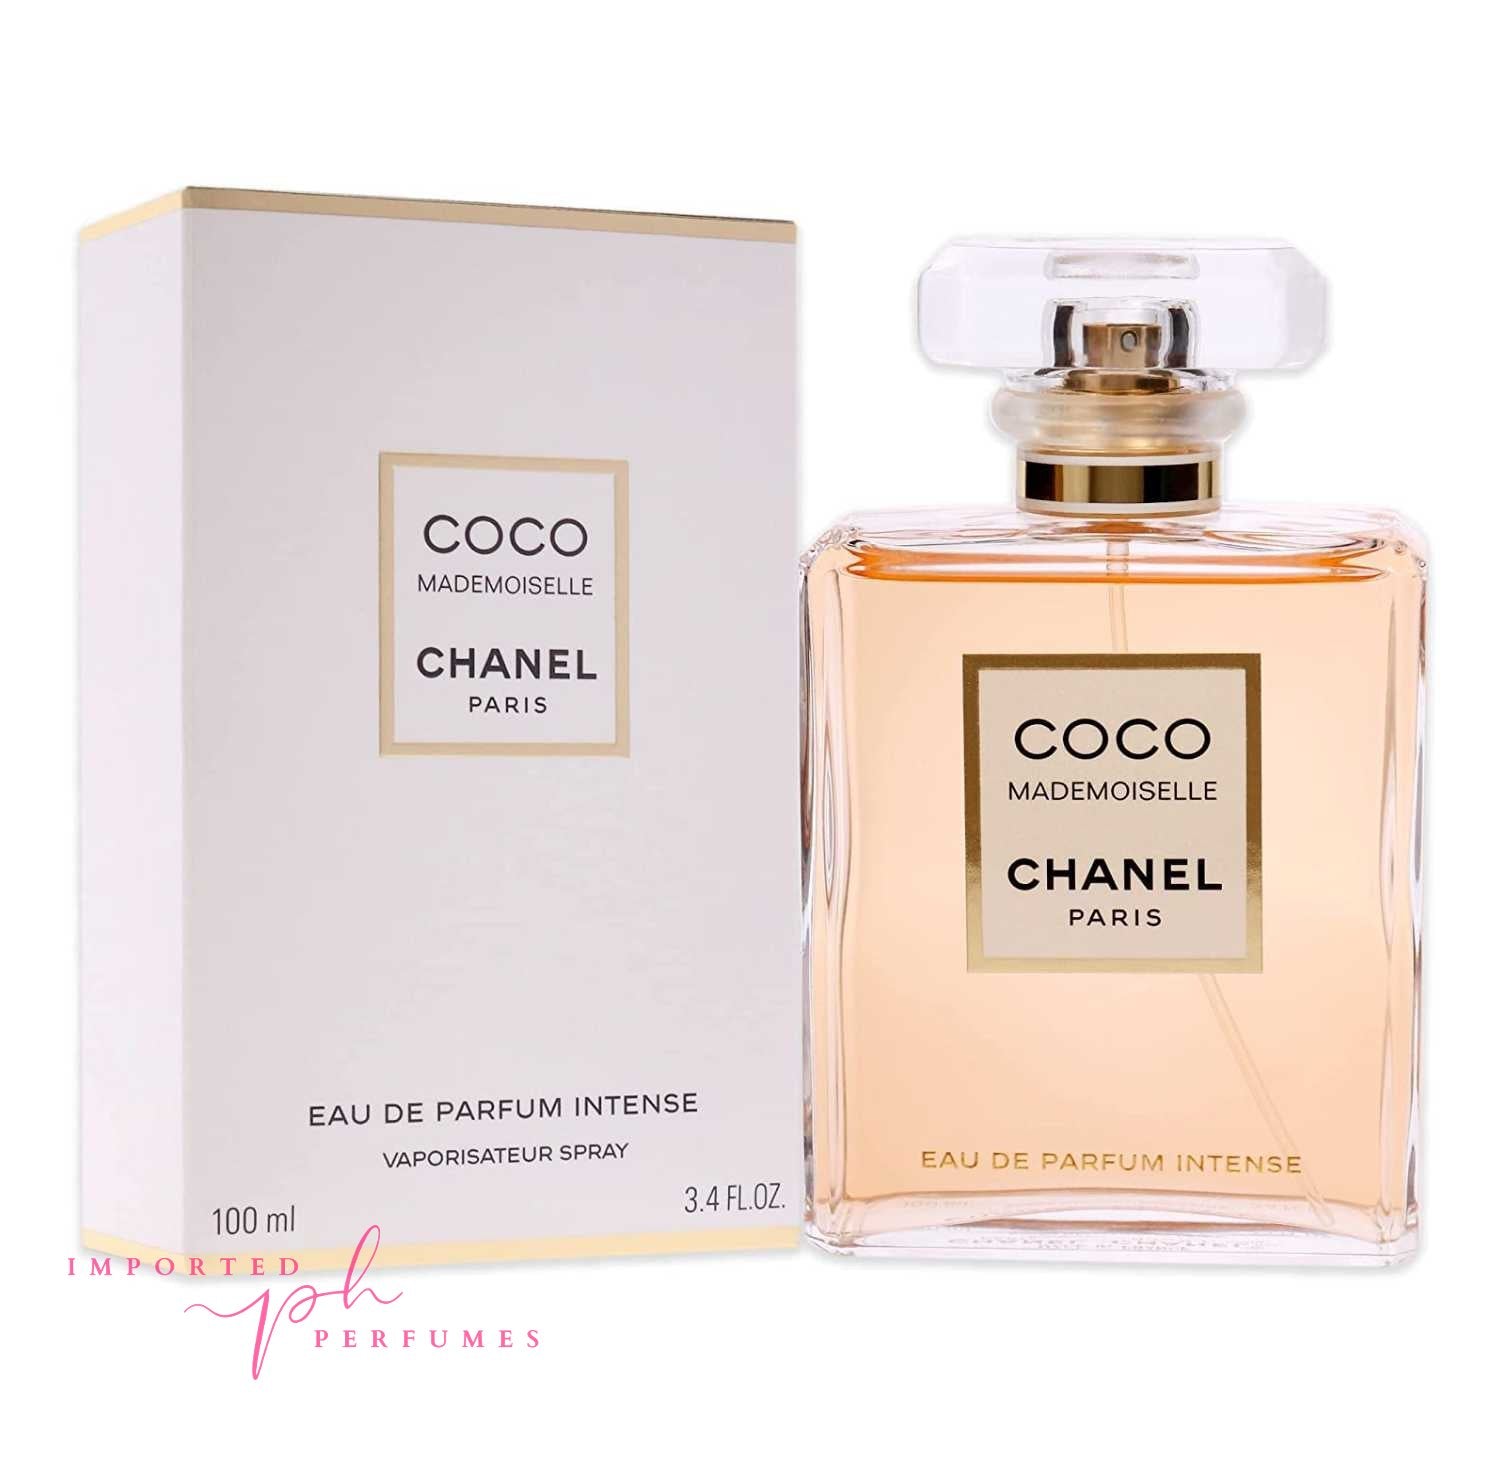 Chanel Perfumes for sale in The Villages, Florida